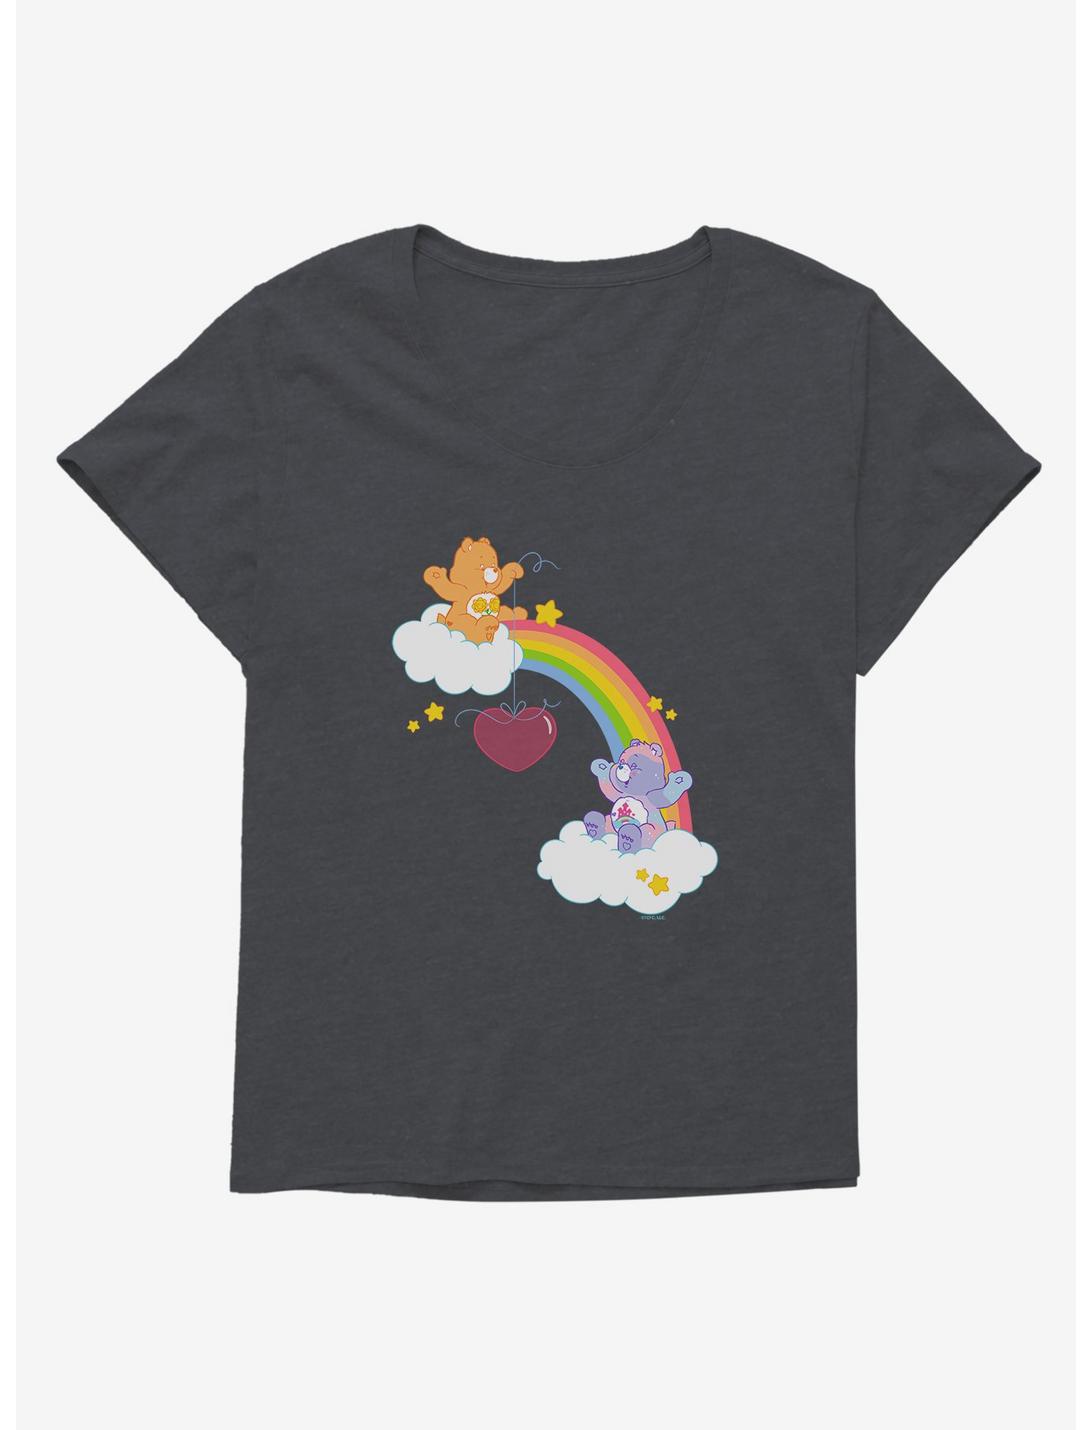 Care Bears Share The Love Girls T-Shirt Plus Size, , hi-res